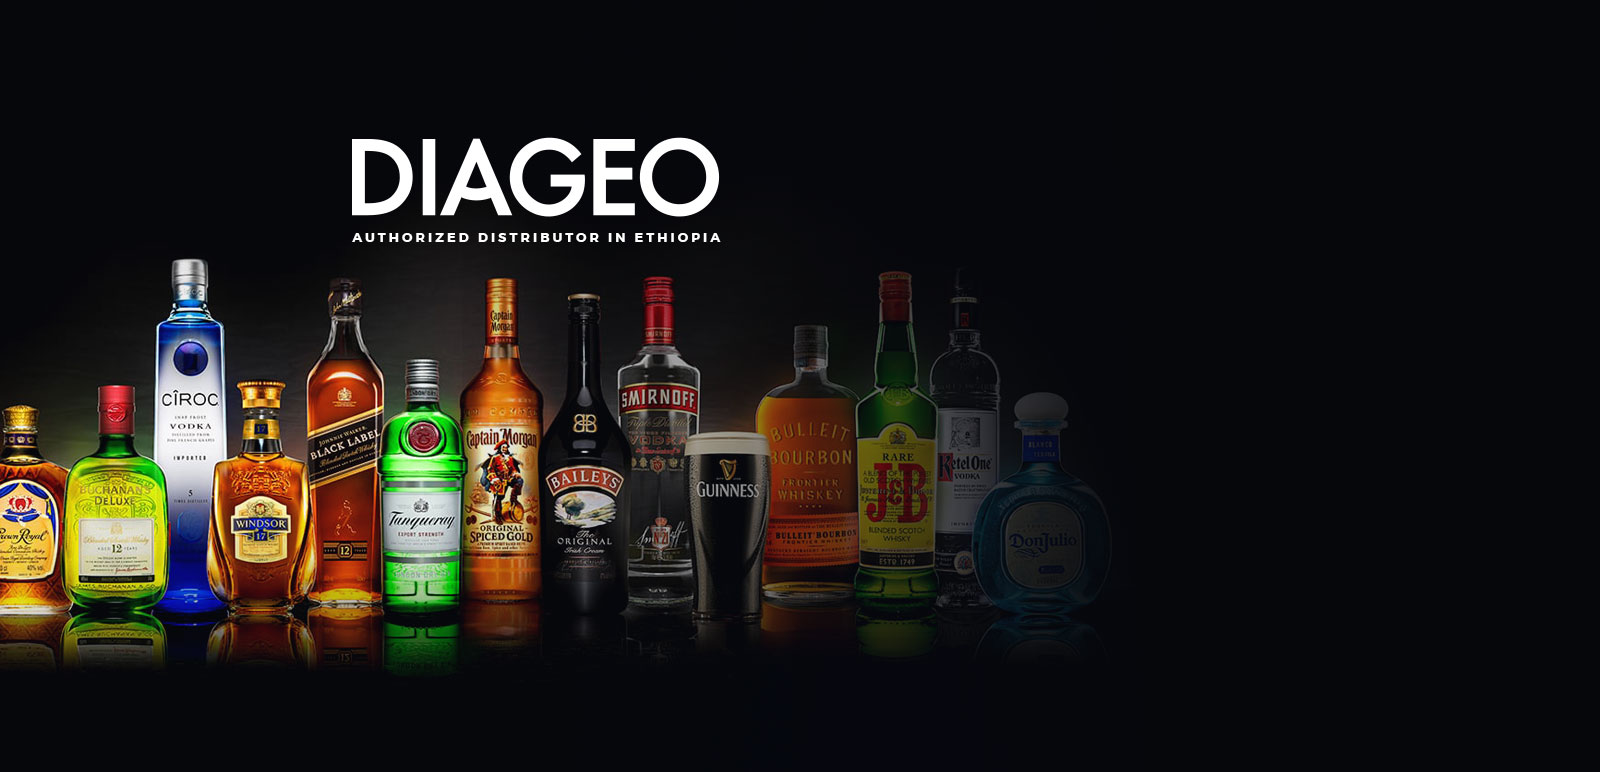 Rungo is now an Authorized Distributor in Ethiopia